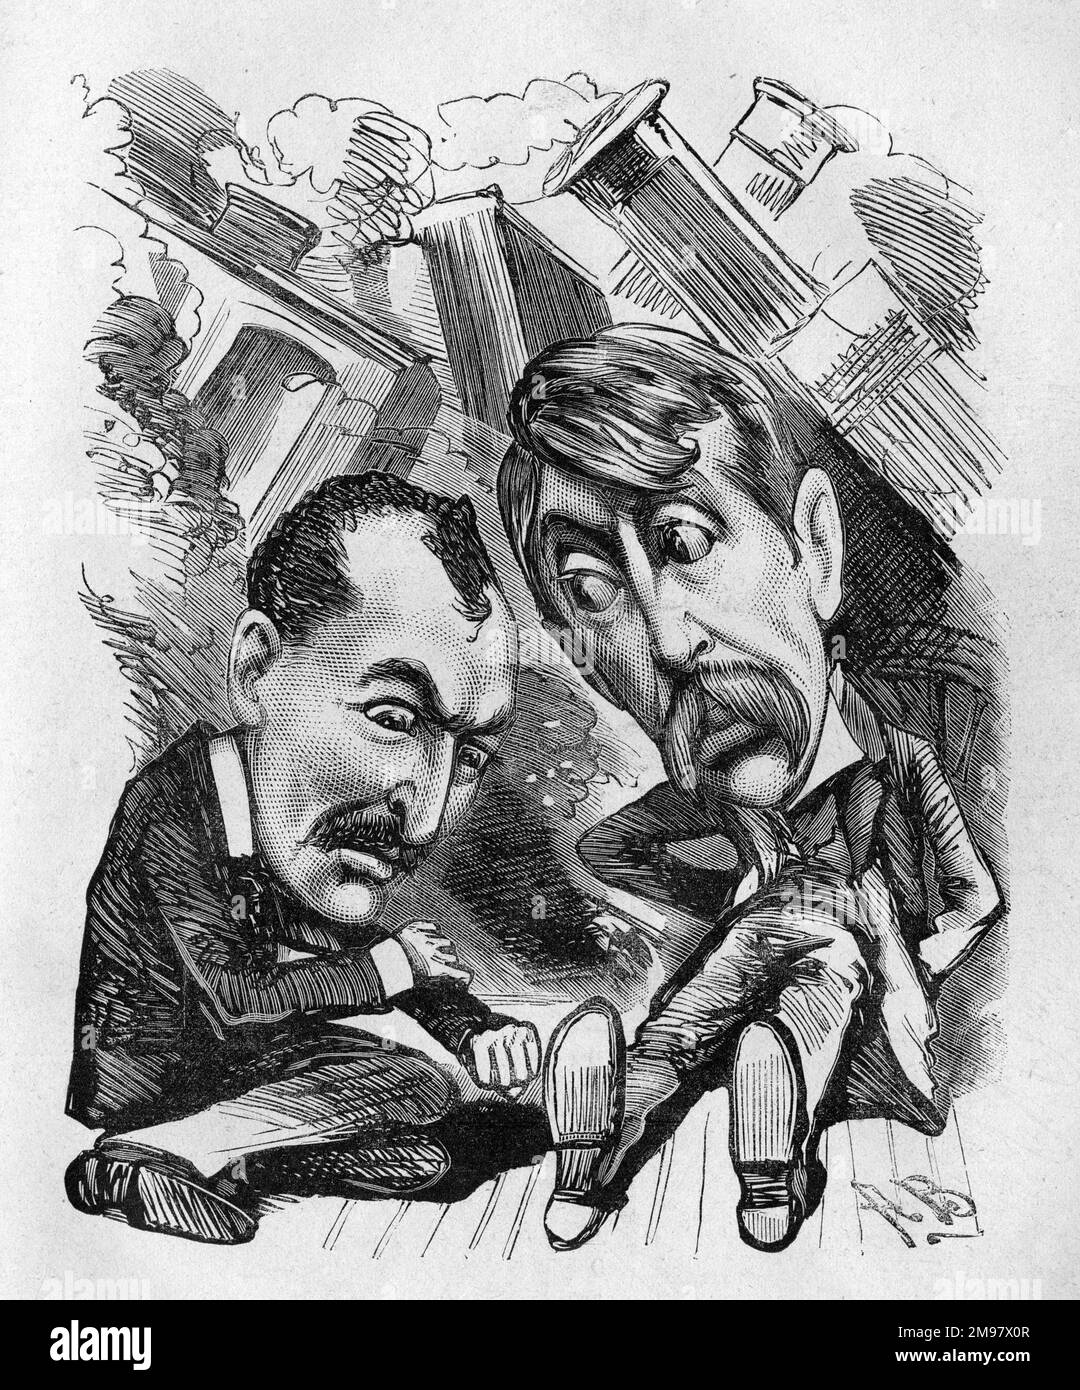 Cartoon of Augustus Harris (1852-1896, left), British actor, dramatist and impresario, and Henry Alfred Pettitt (1848-1893, right), British actor and dramatist. Never mind, Pettitt, if the newspapers don't like our railway collision, the Pit and Gallery do. Their new sensational melodrama, Pluck, was in production at Drury Lane Theatre, London. Despite the excitement of a train wreck, a snowstorm, a mob breaking windows and a burning building, the seven long acts and waits between scenes had irritated the critics. Stock Photo